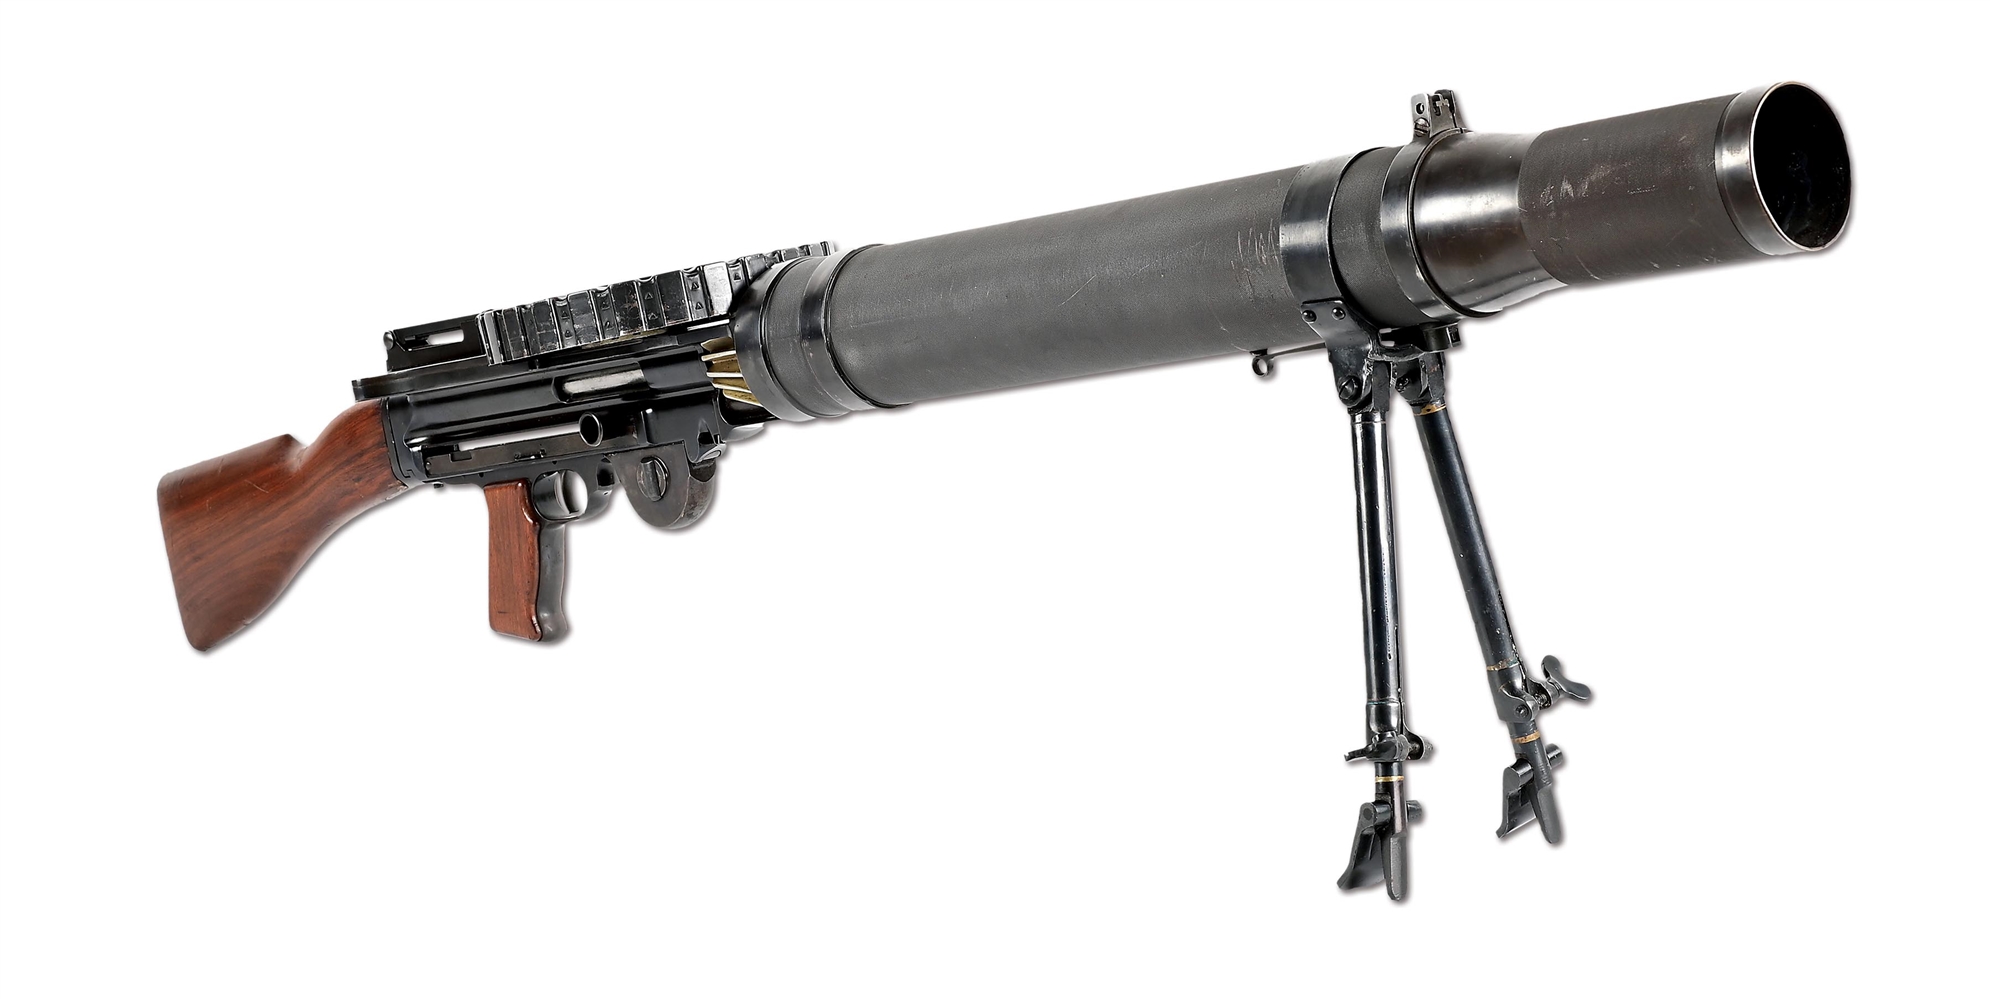 (N) ABSOLUTELY STUNNING CONDITION COMMERCIAL SAVAGE ARMS COMPANY LEWIS MACHINE GUN IN .303 (CURIO AND RELIC).